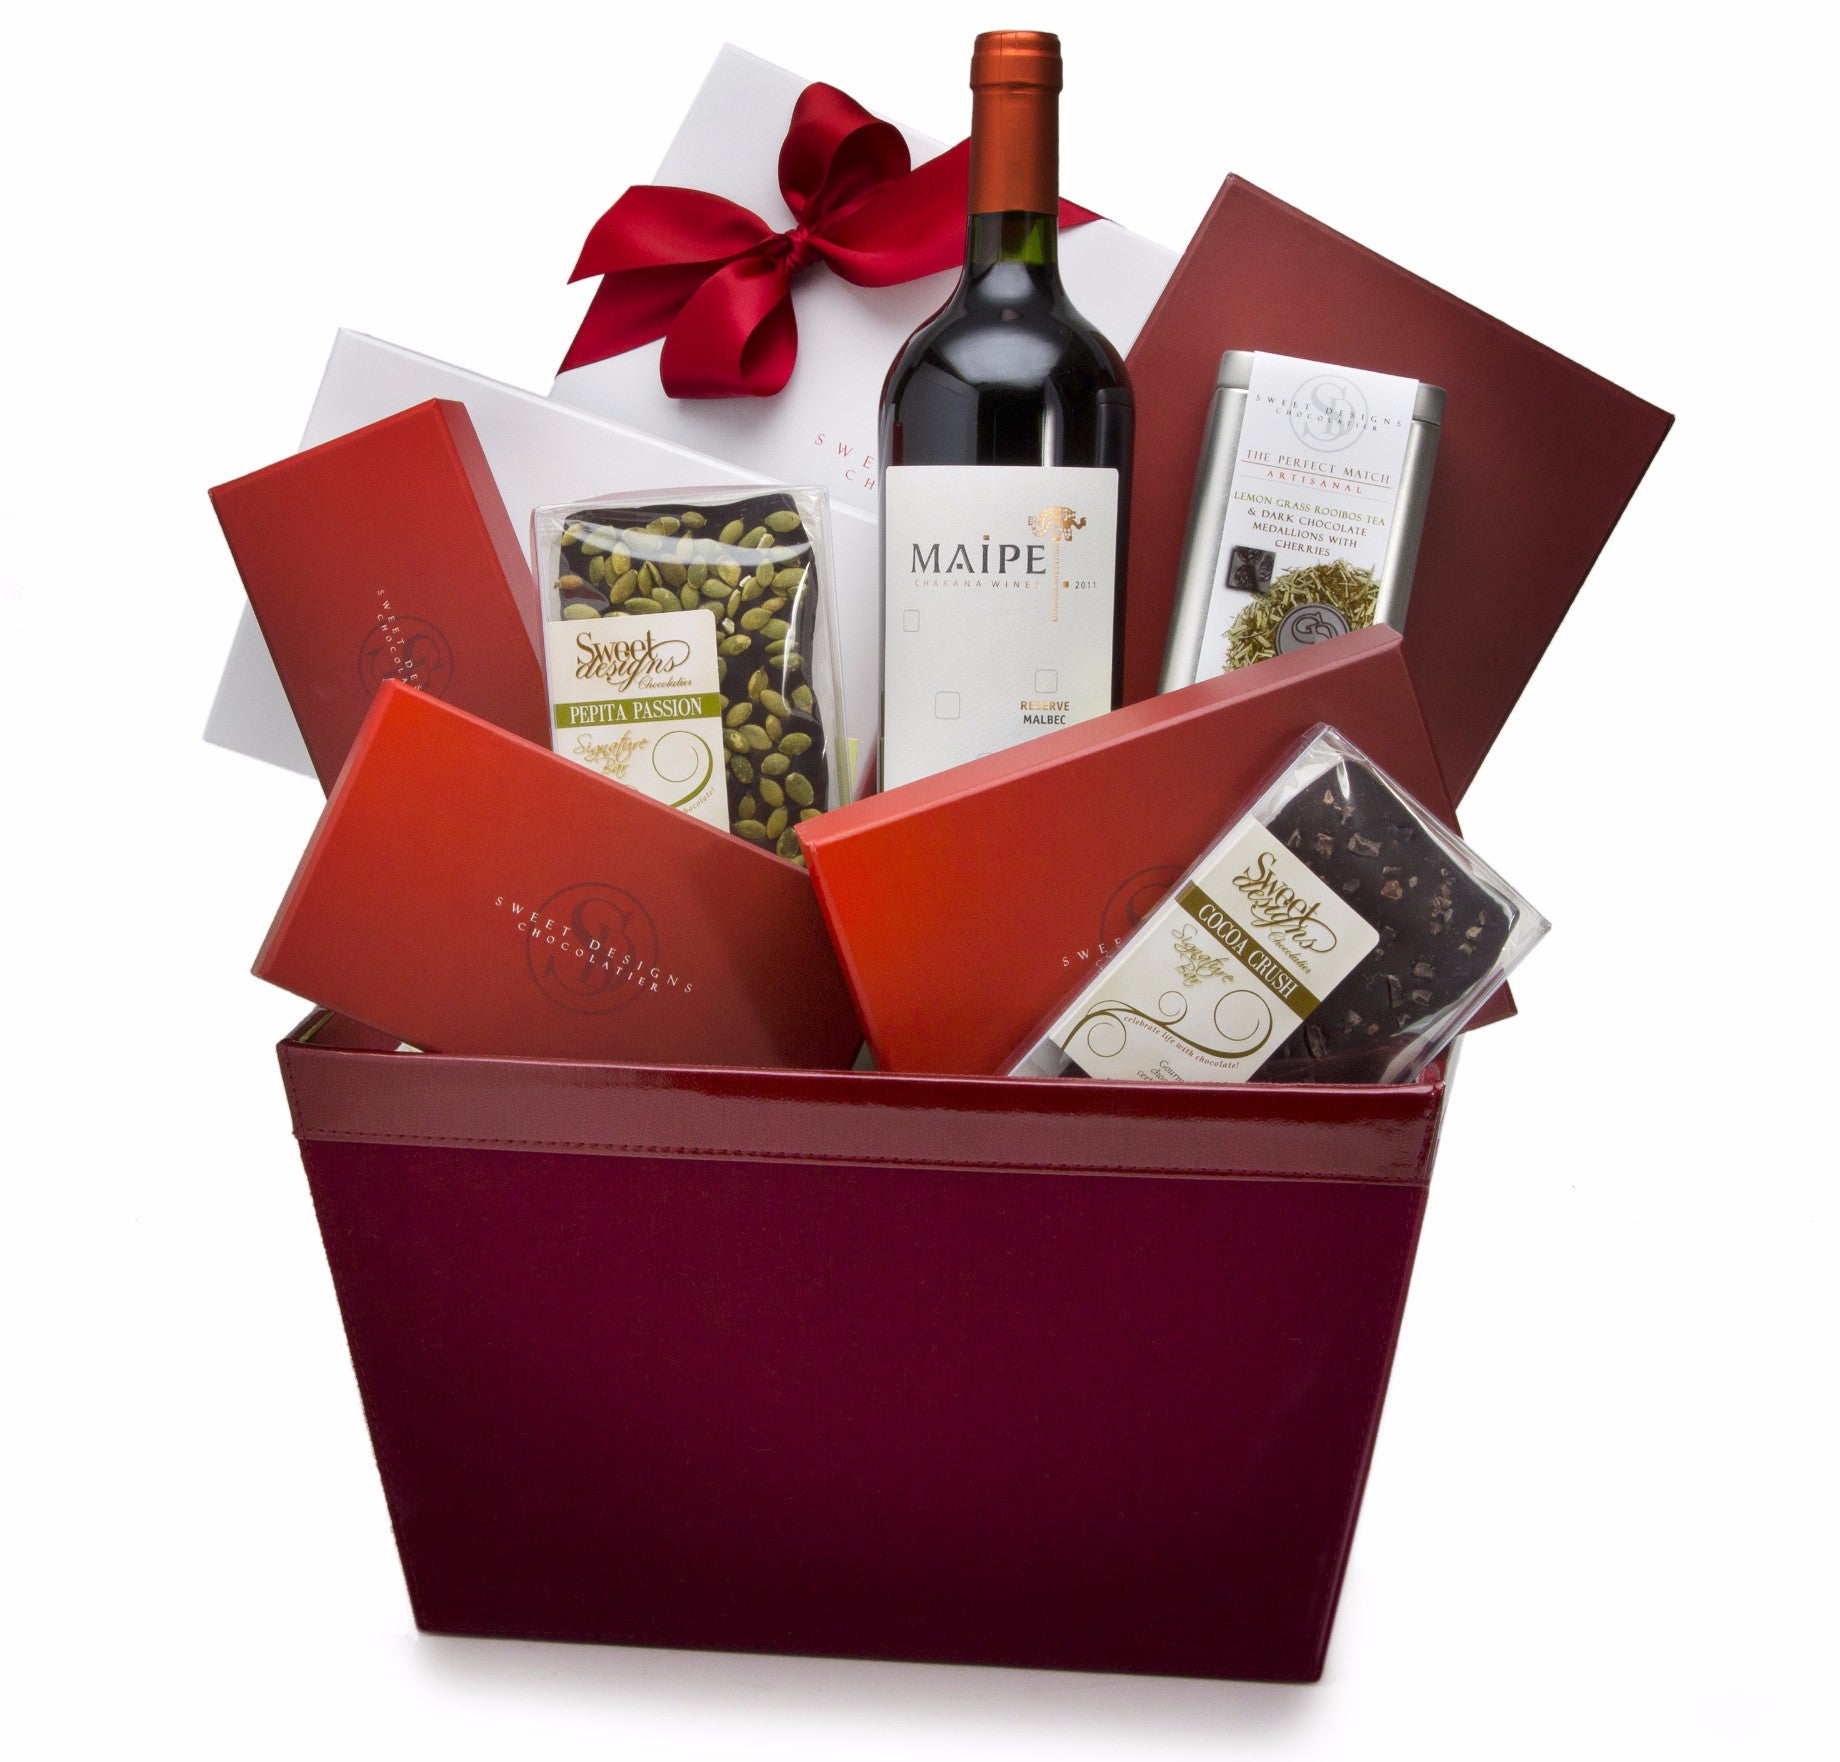 Share more than 265 chocolate gift hamper